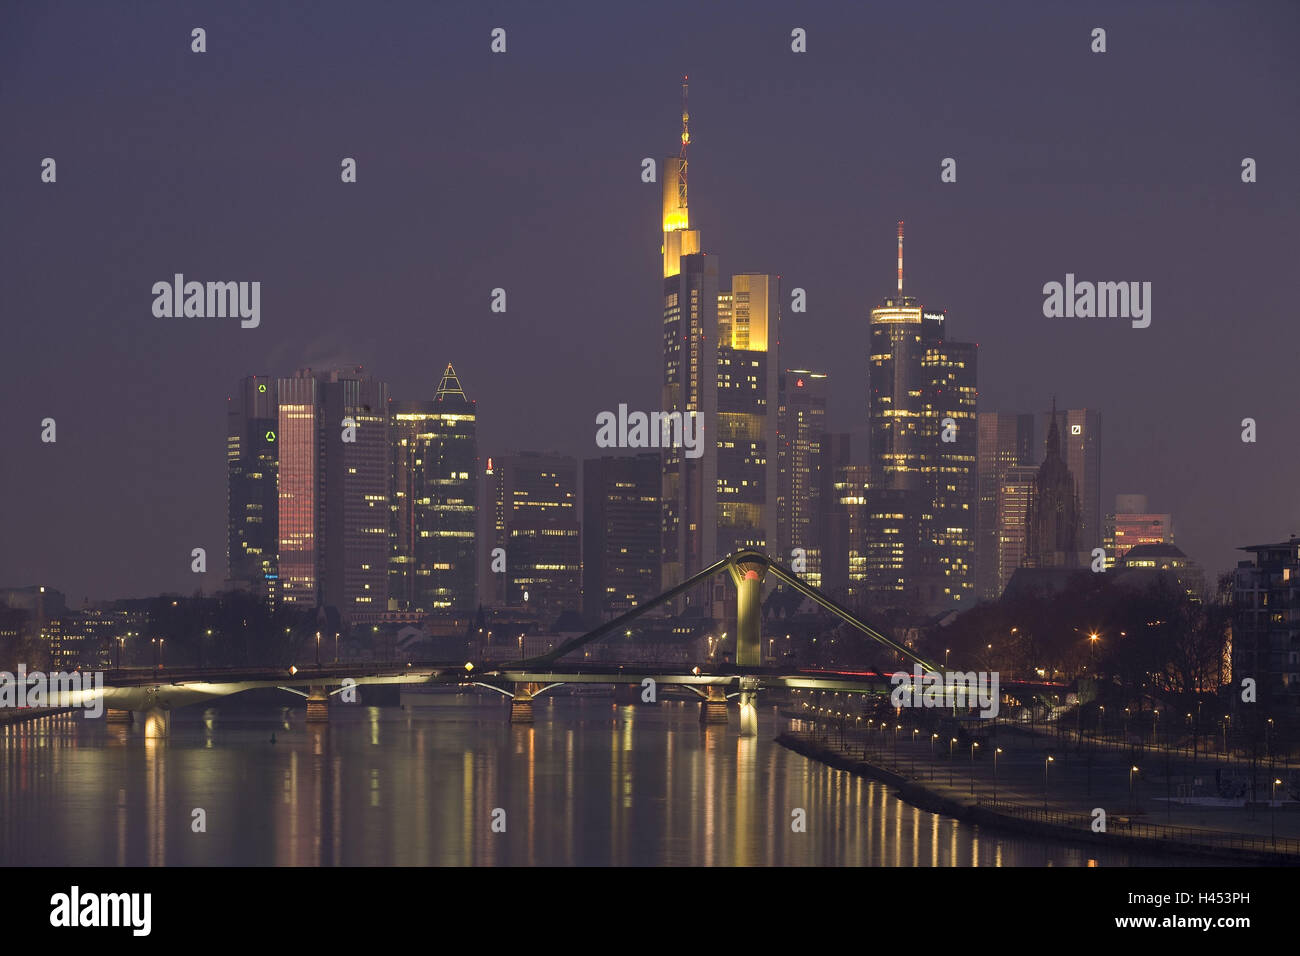 Germany, Hessen, Frankfurt on the Main, town view, skyline, river Main, lighting, evening, town, city, metropolis, financial metropolis, architecture, houses, buildings, high rises, high-rise office blocks, office buildings, outside, urban, urbane, lights, bridge, mirroring, water surface, Stock Photo